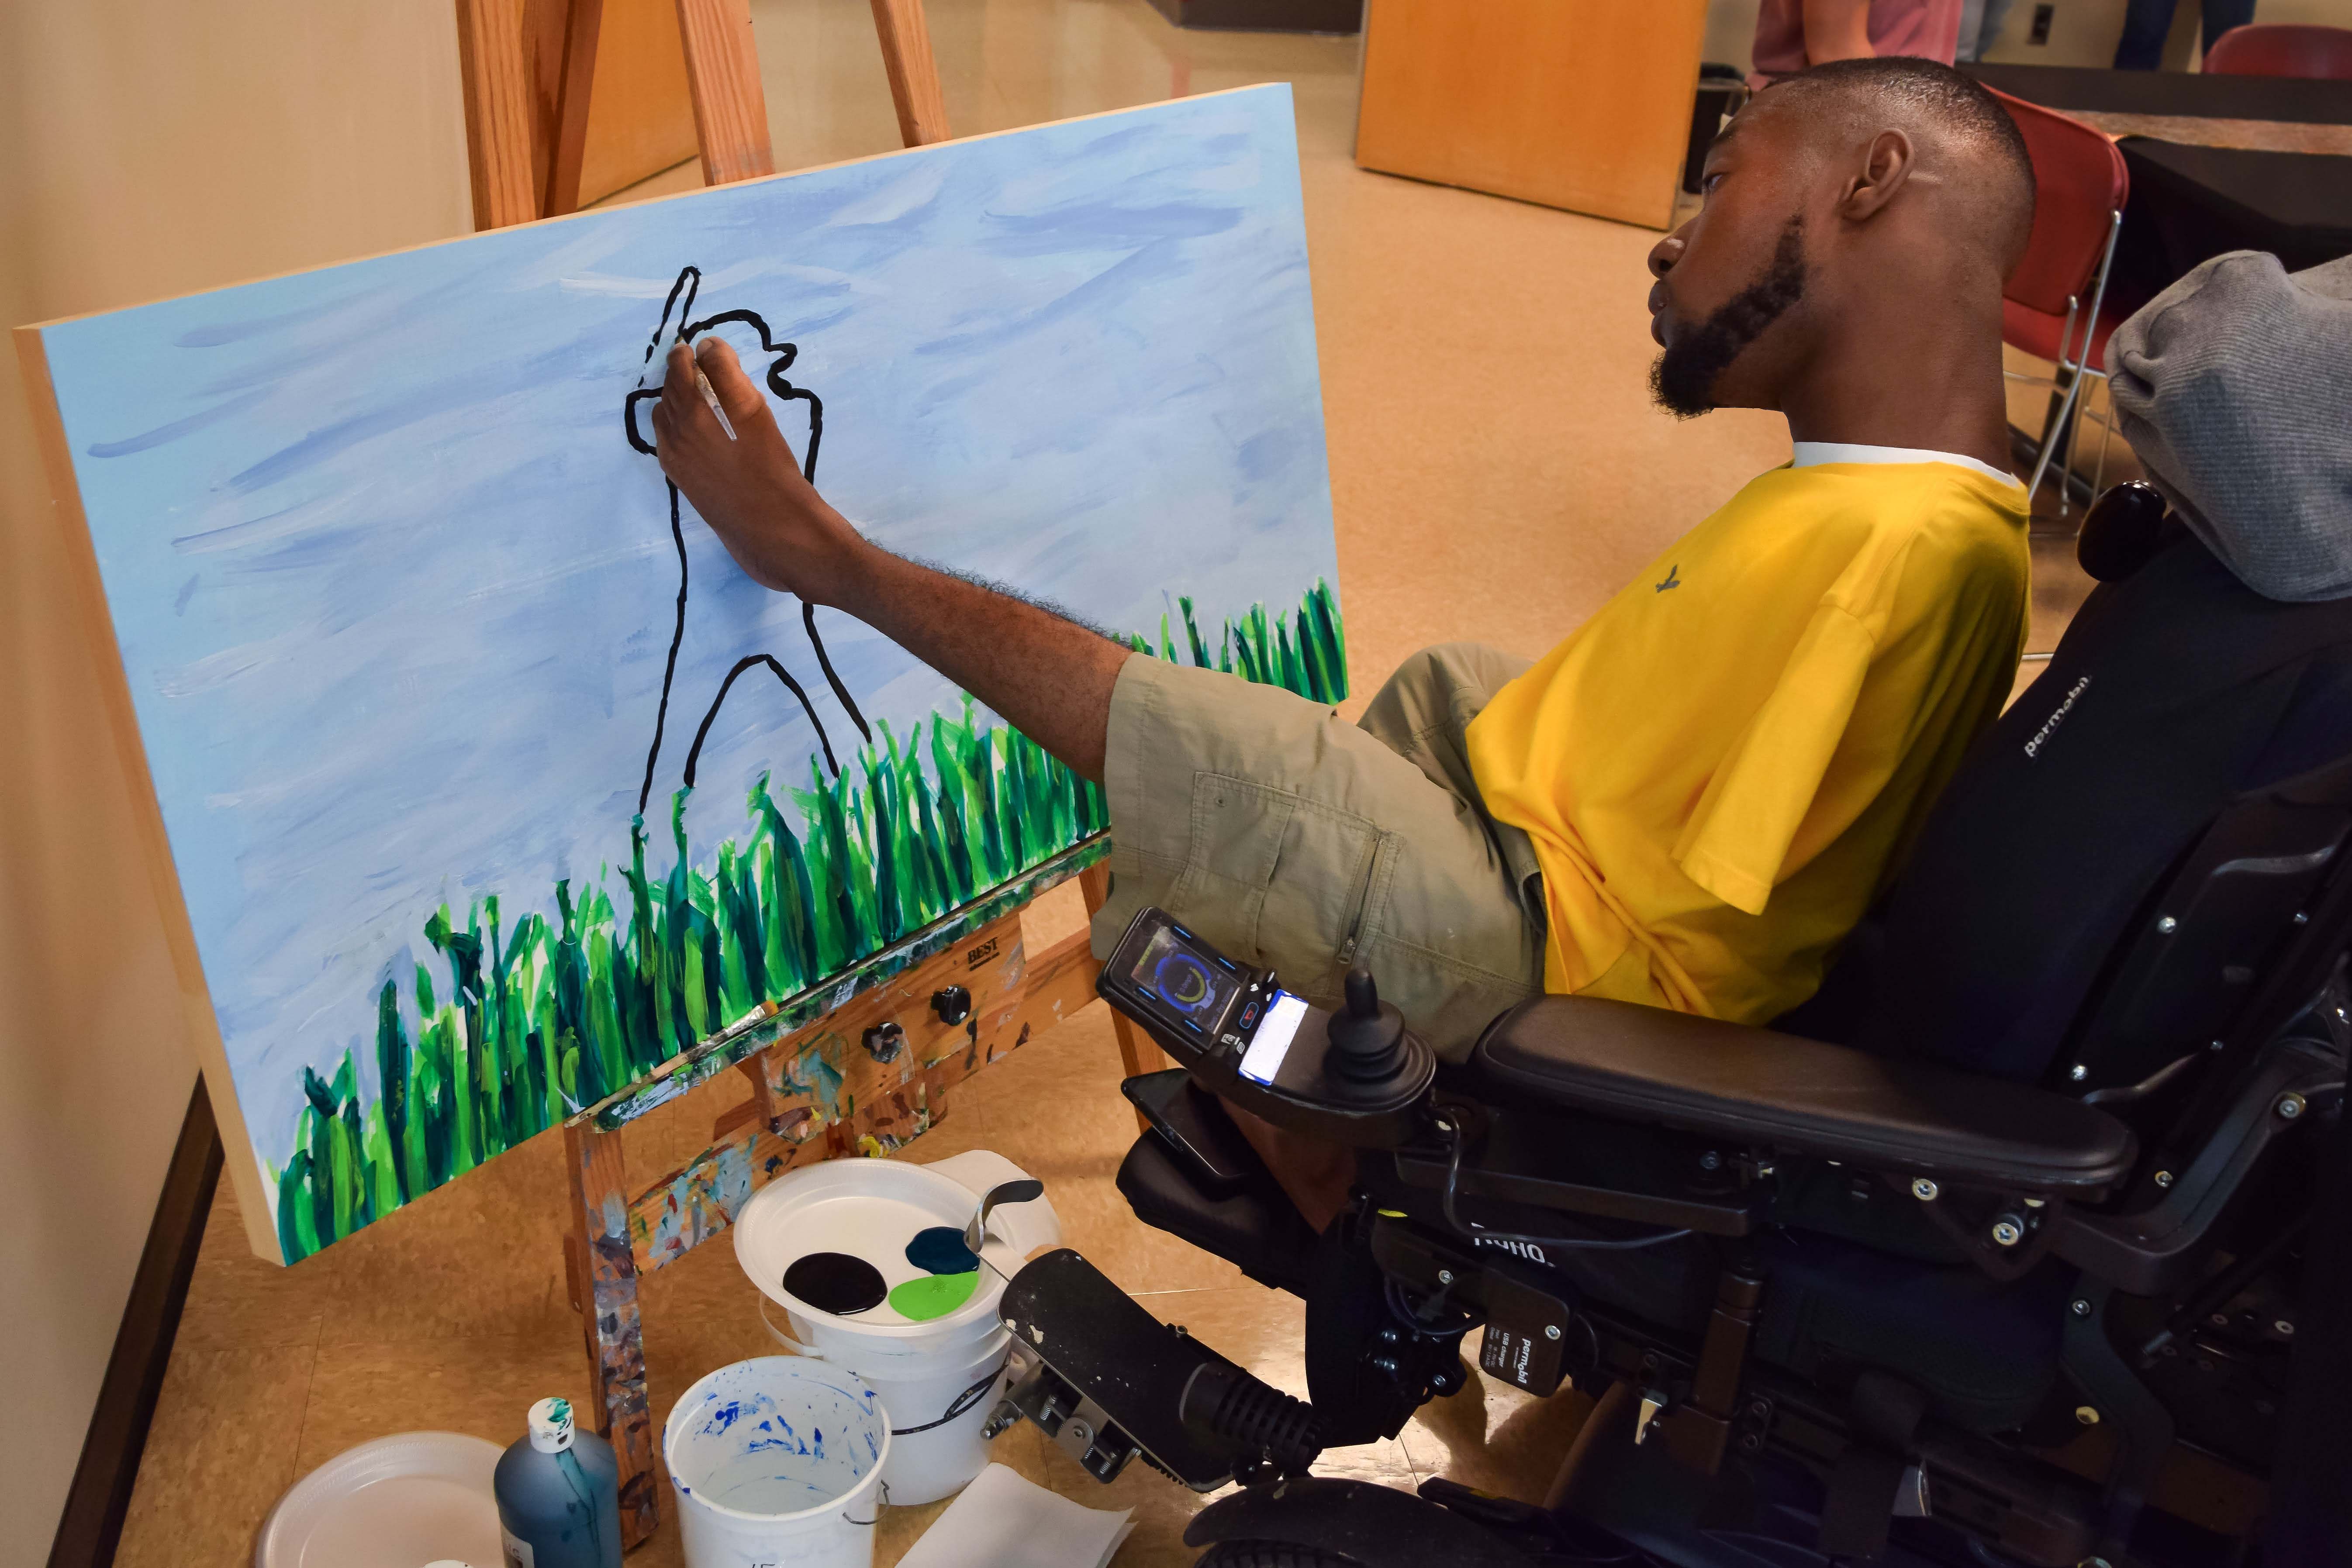 Student in wheelchair paints with his feet